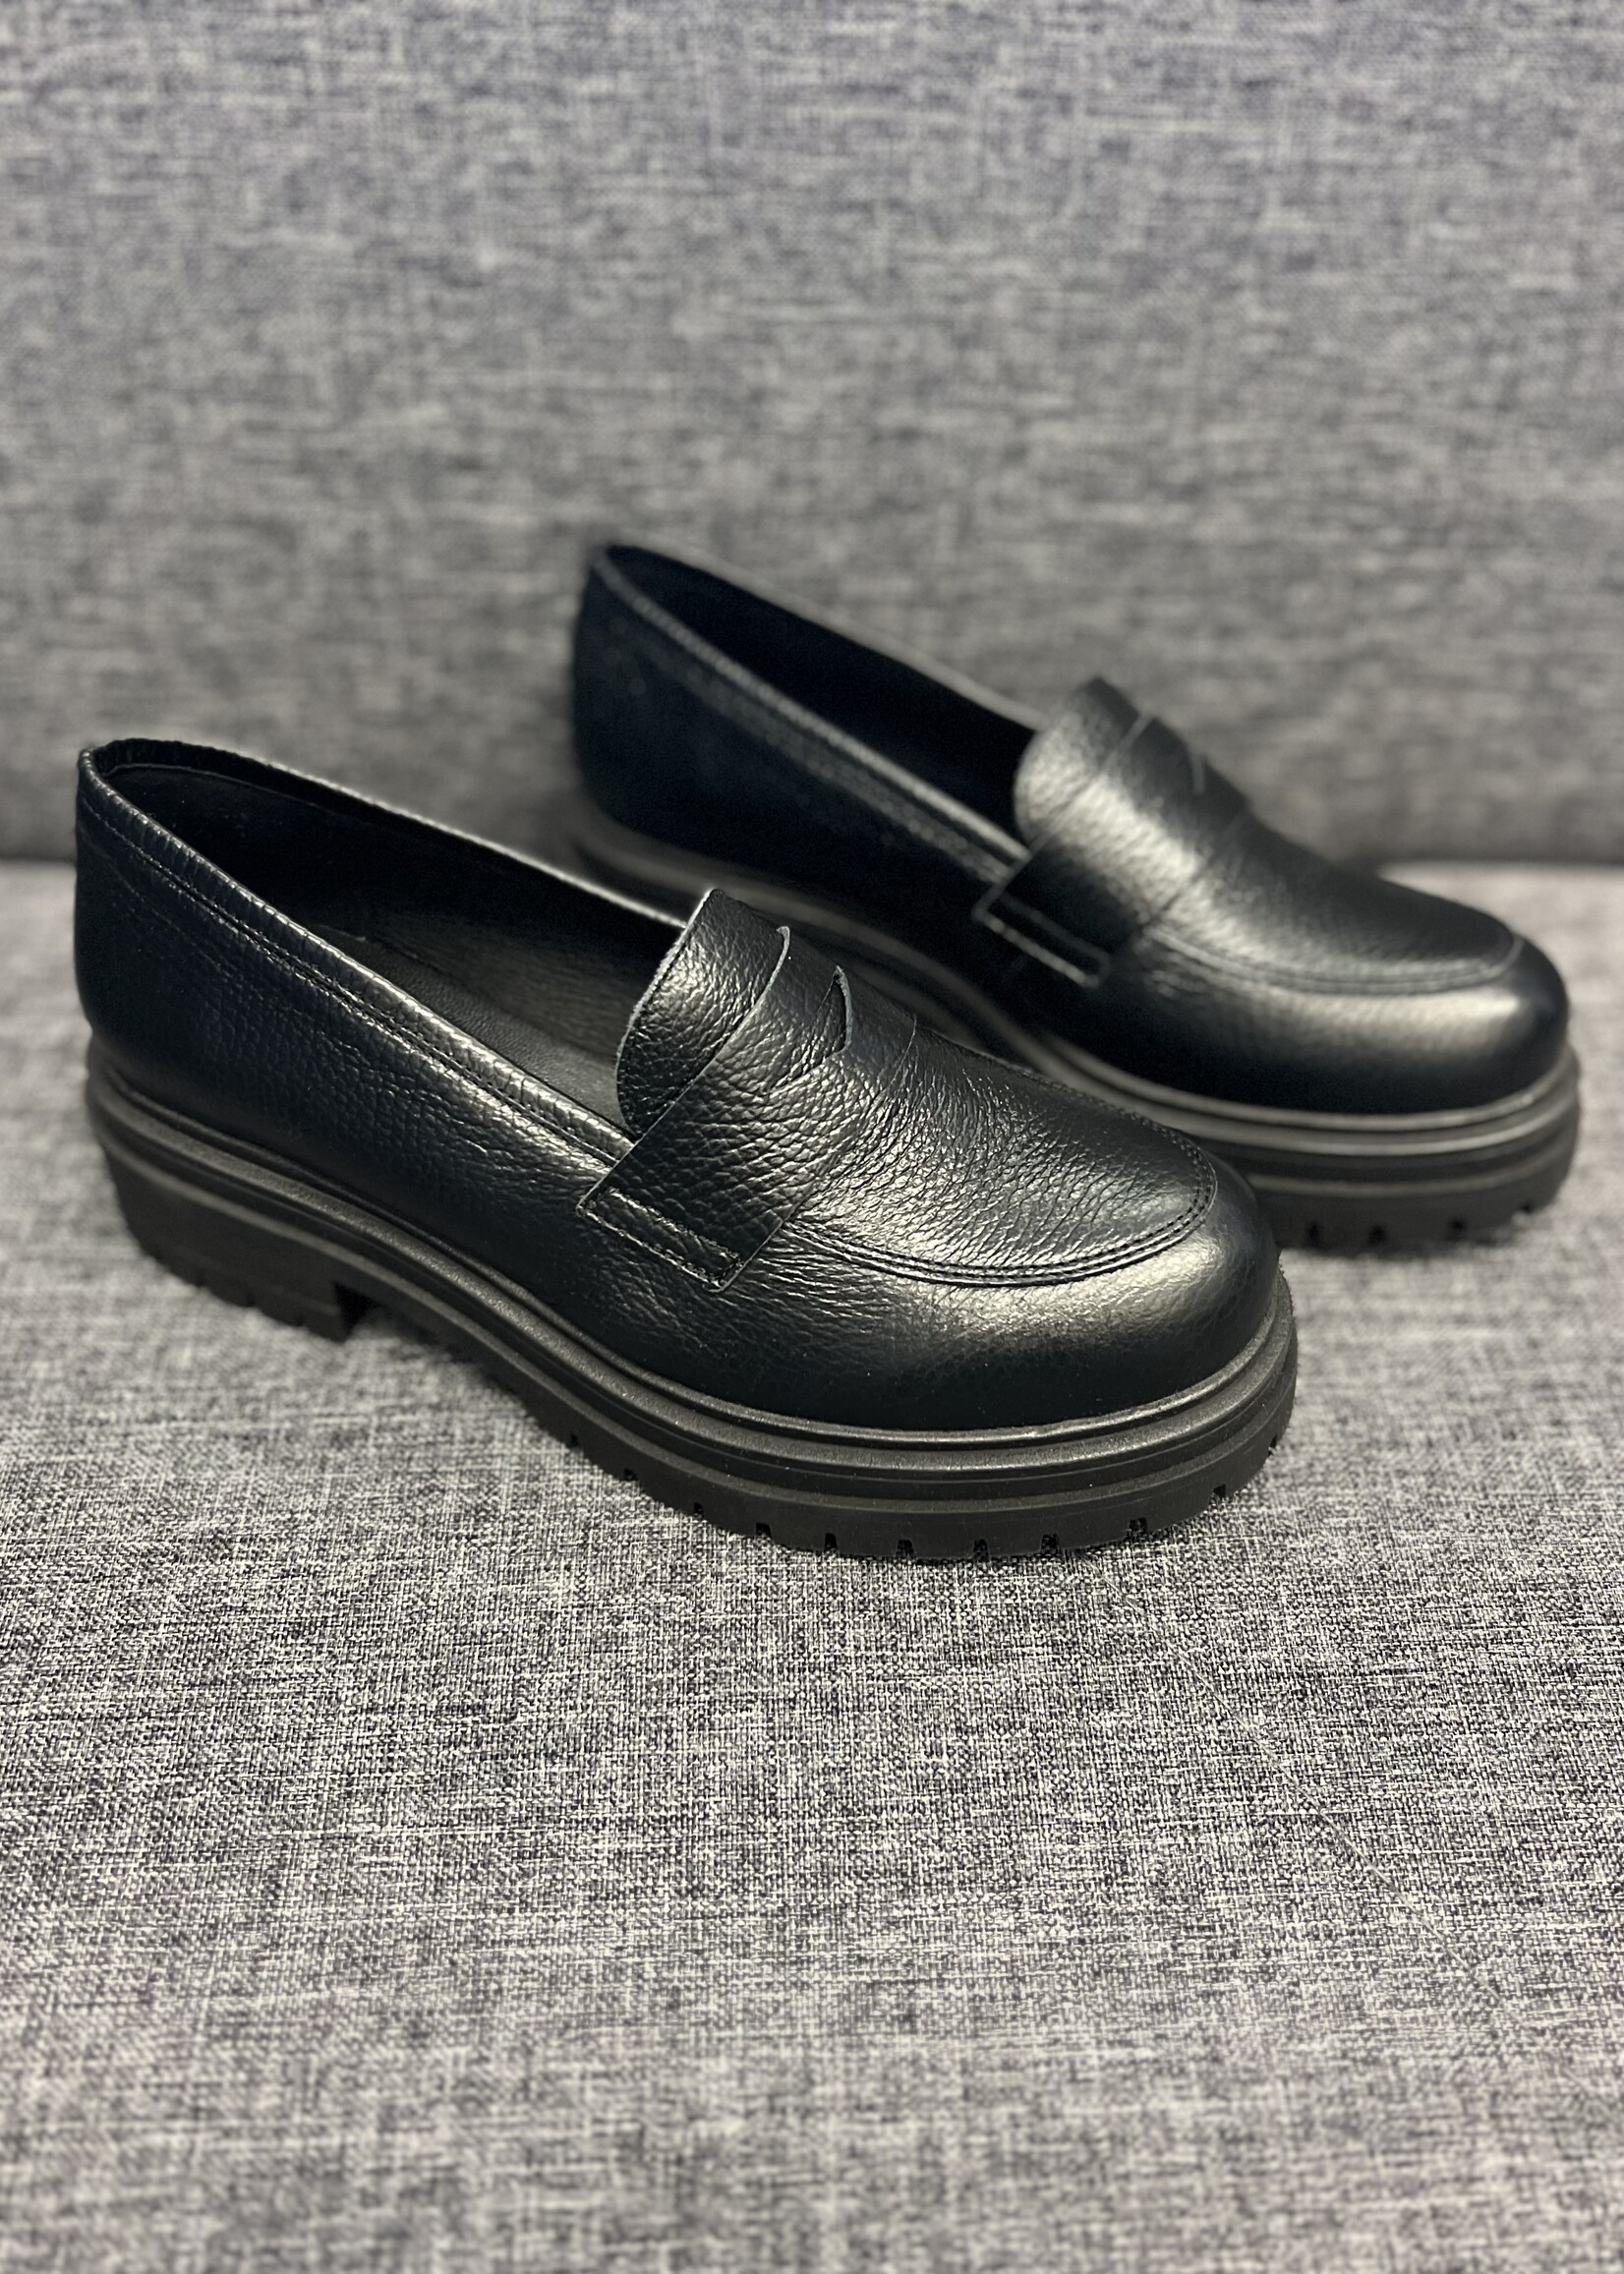 LeBLANC finds RIO Leather Loafer